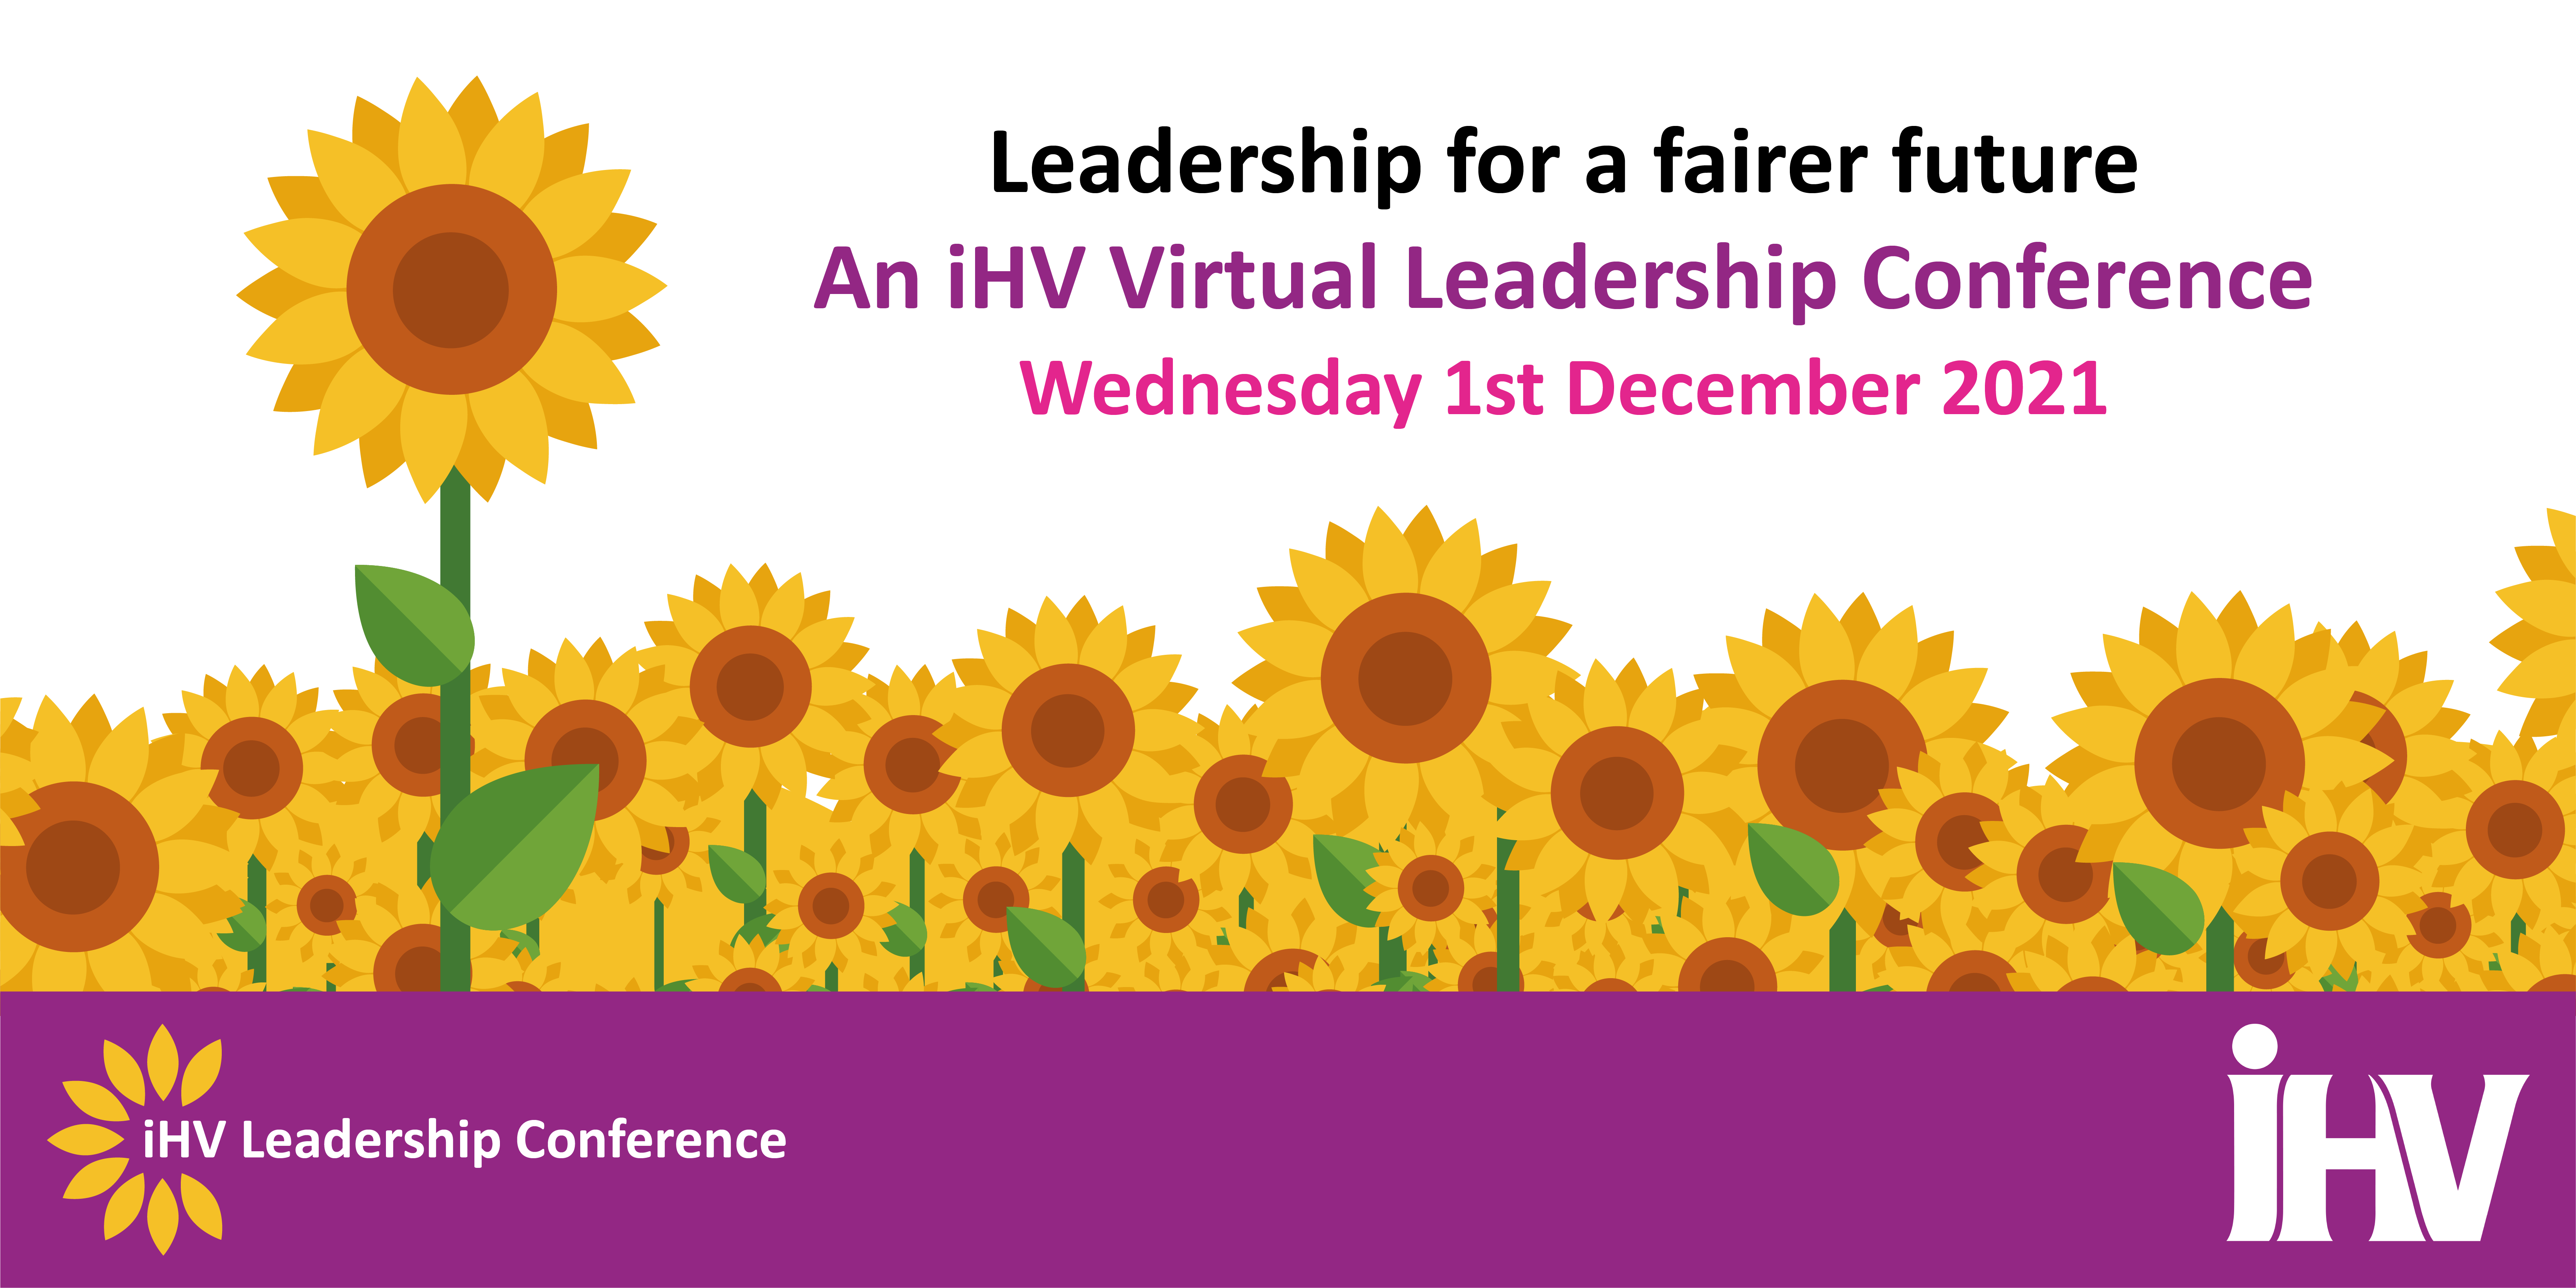 iHV Leadership Conference 2021: Leadership for a fairer future 